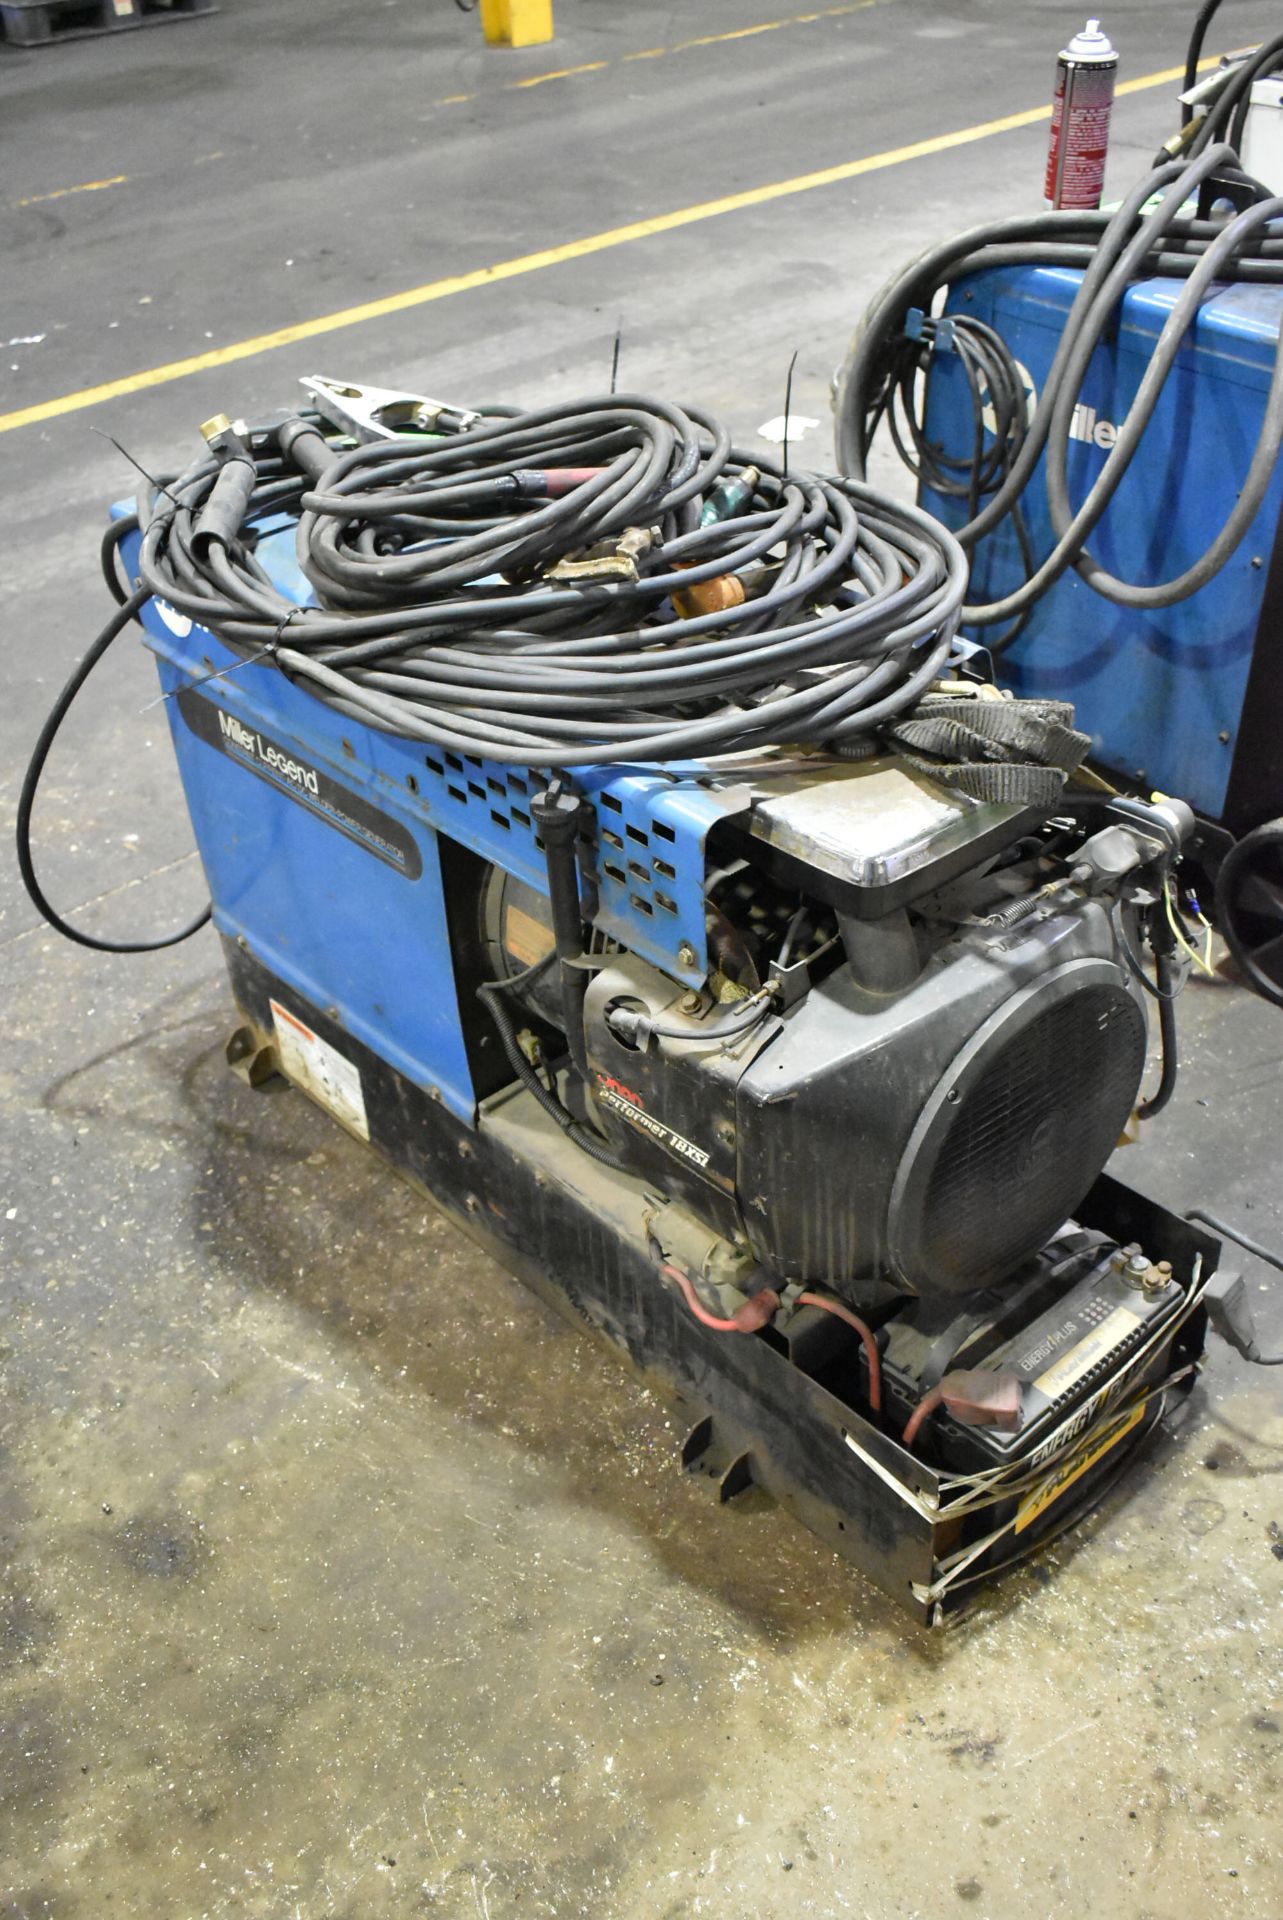 MILLER LEGEND GAS POWERED WELDER GENERATOR WITH ONAN PERFORMER 18XSI ENGINE, CABLES & GUN [RIGGING - Image 2 of 4